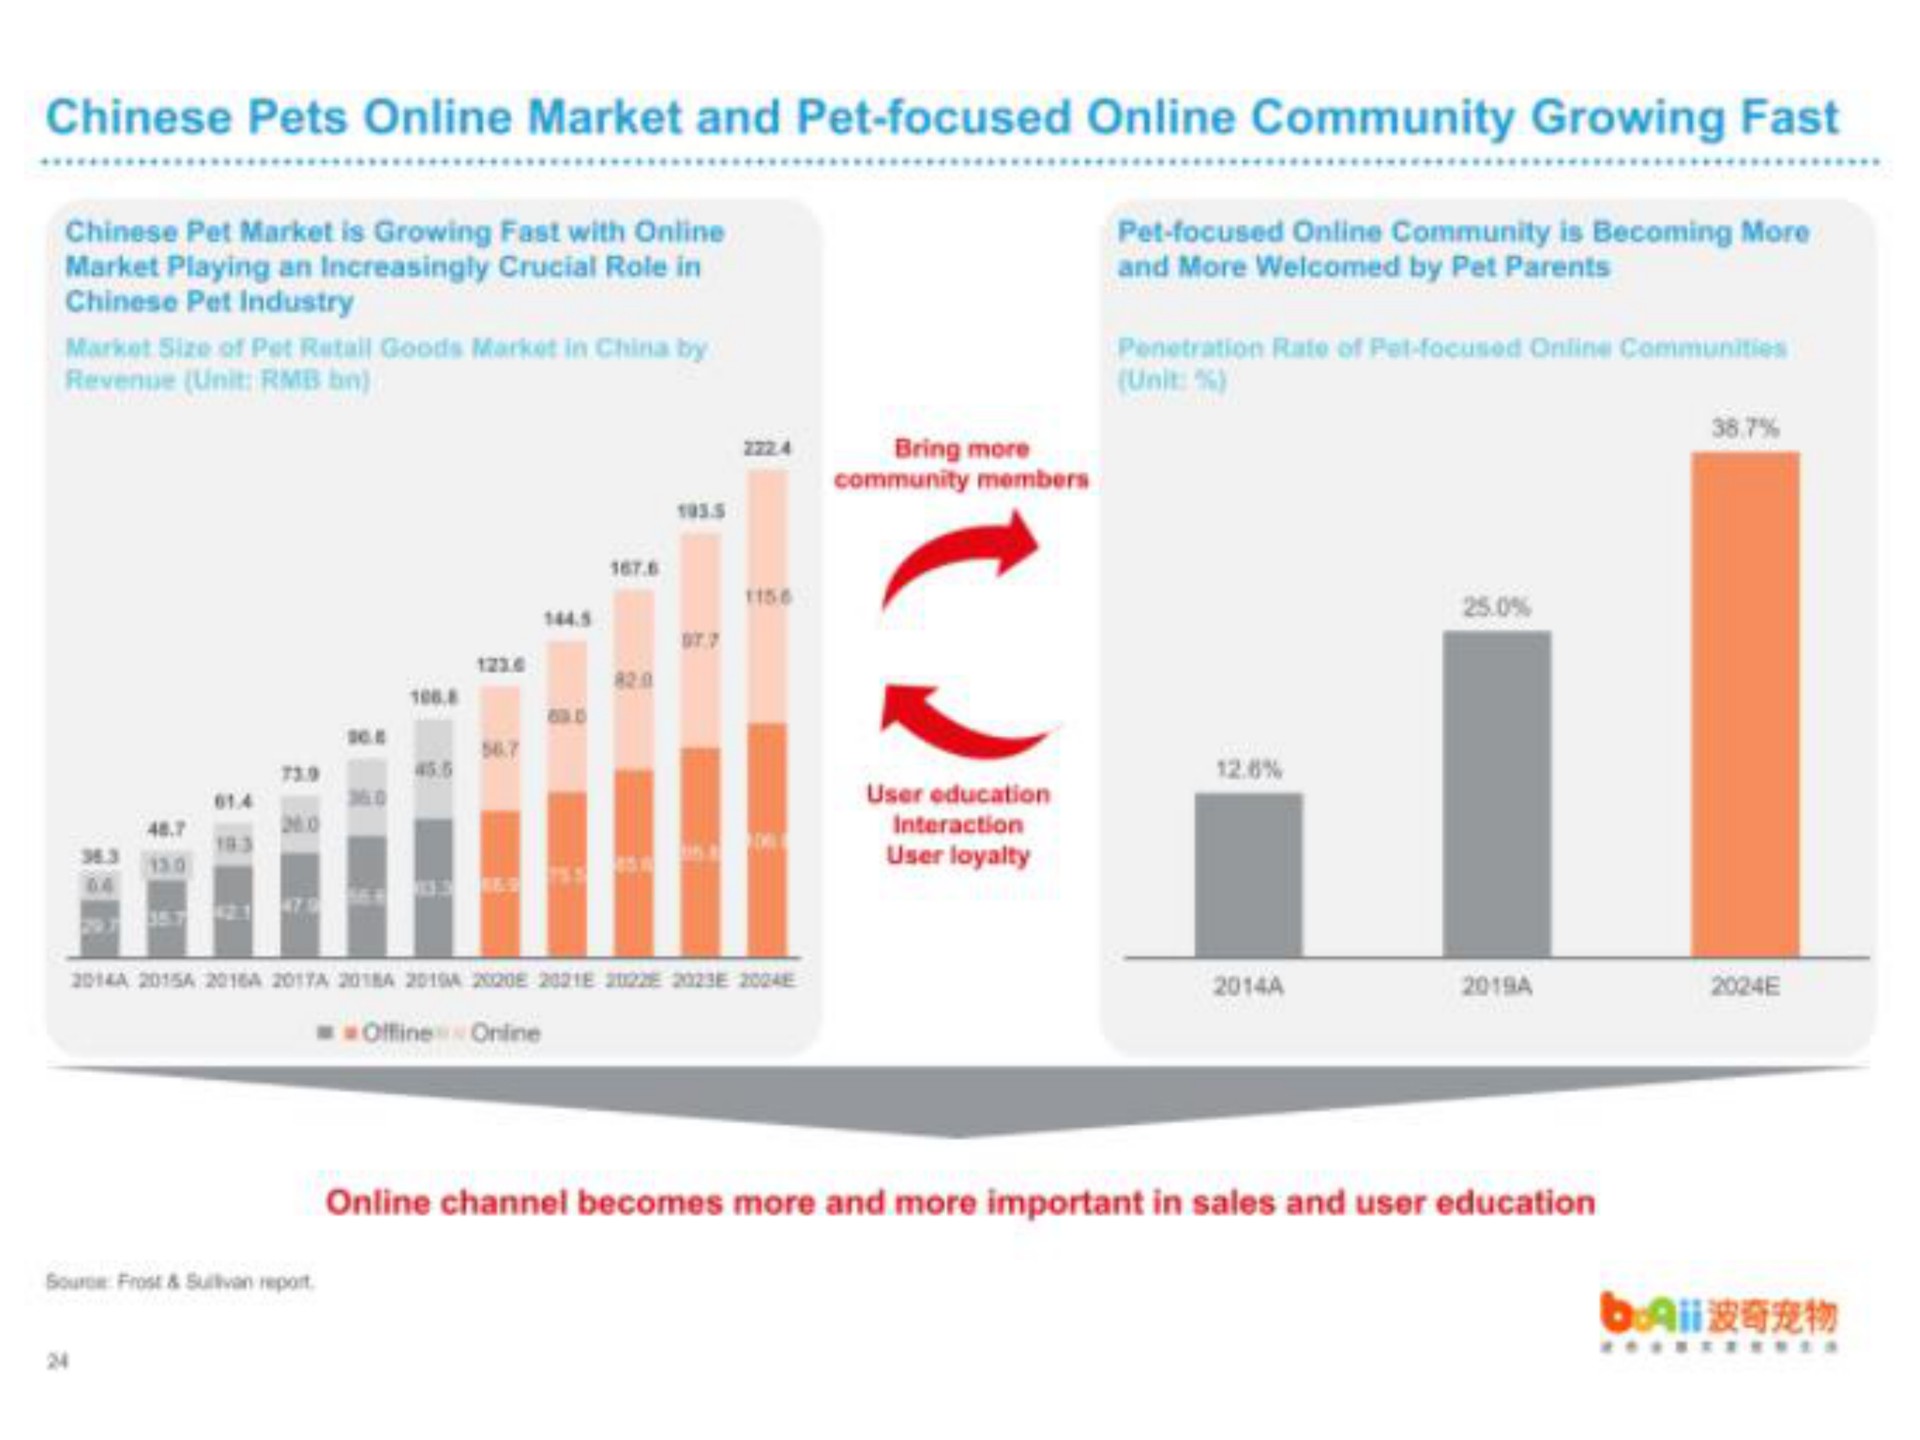 pets market and pet focused community growing fast pet market is growing fast with market playing an increasingly crucial role in pet industry pet focused community is becoming more and more welcomed by pet parents channel becomes more and more important in sales and user education rab | Boqii Holding